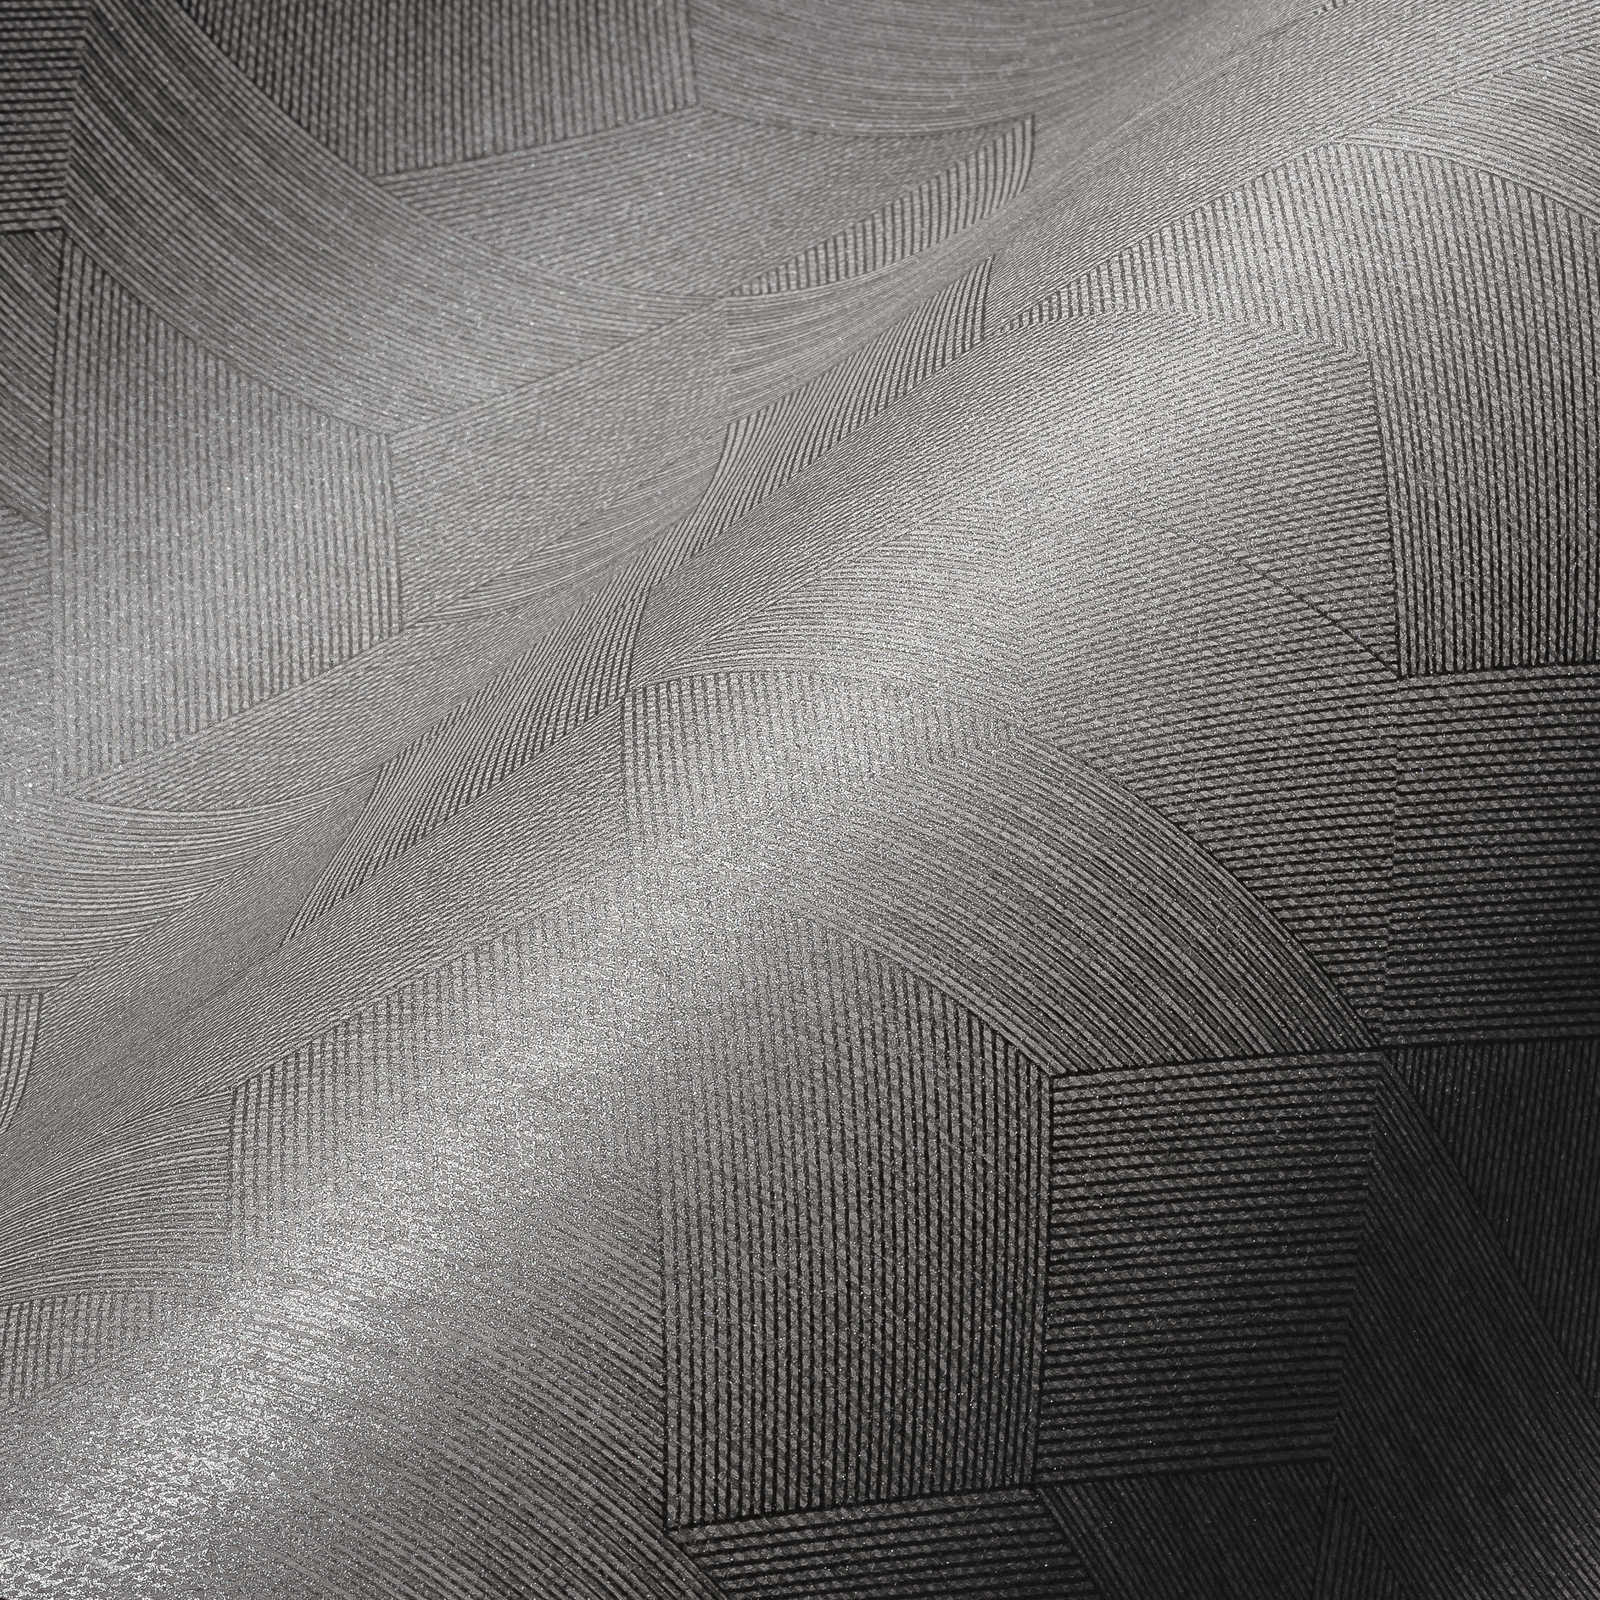             Wallpaper grey with graphic pattern & glossy effect - grey, brown
        